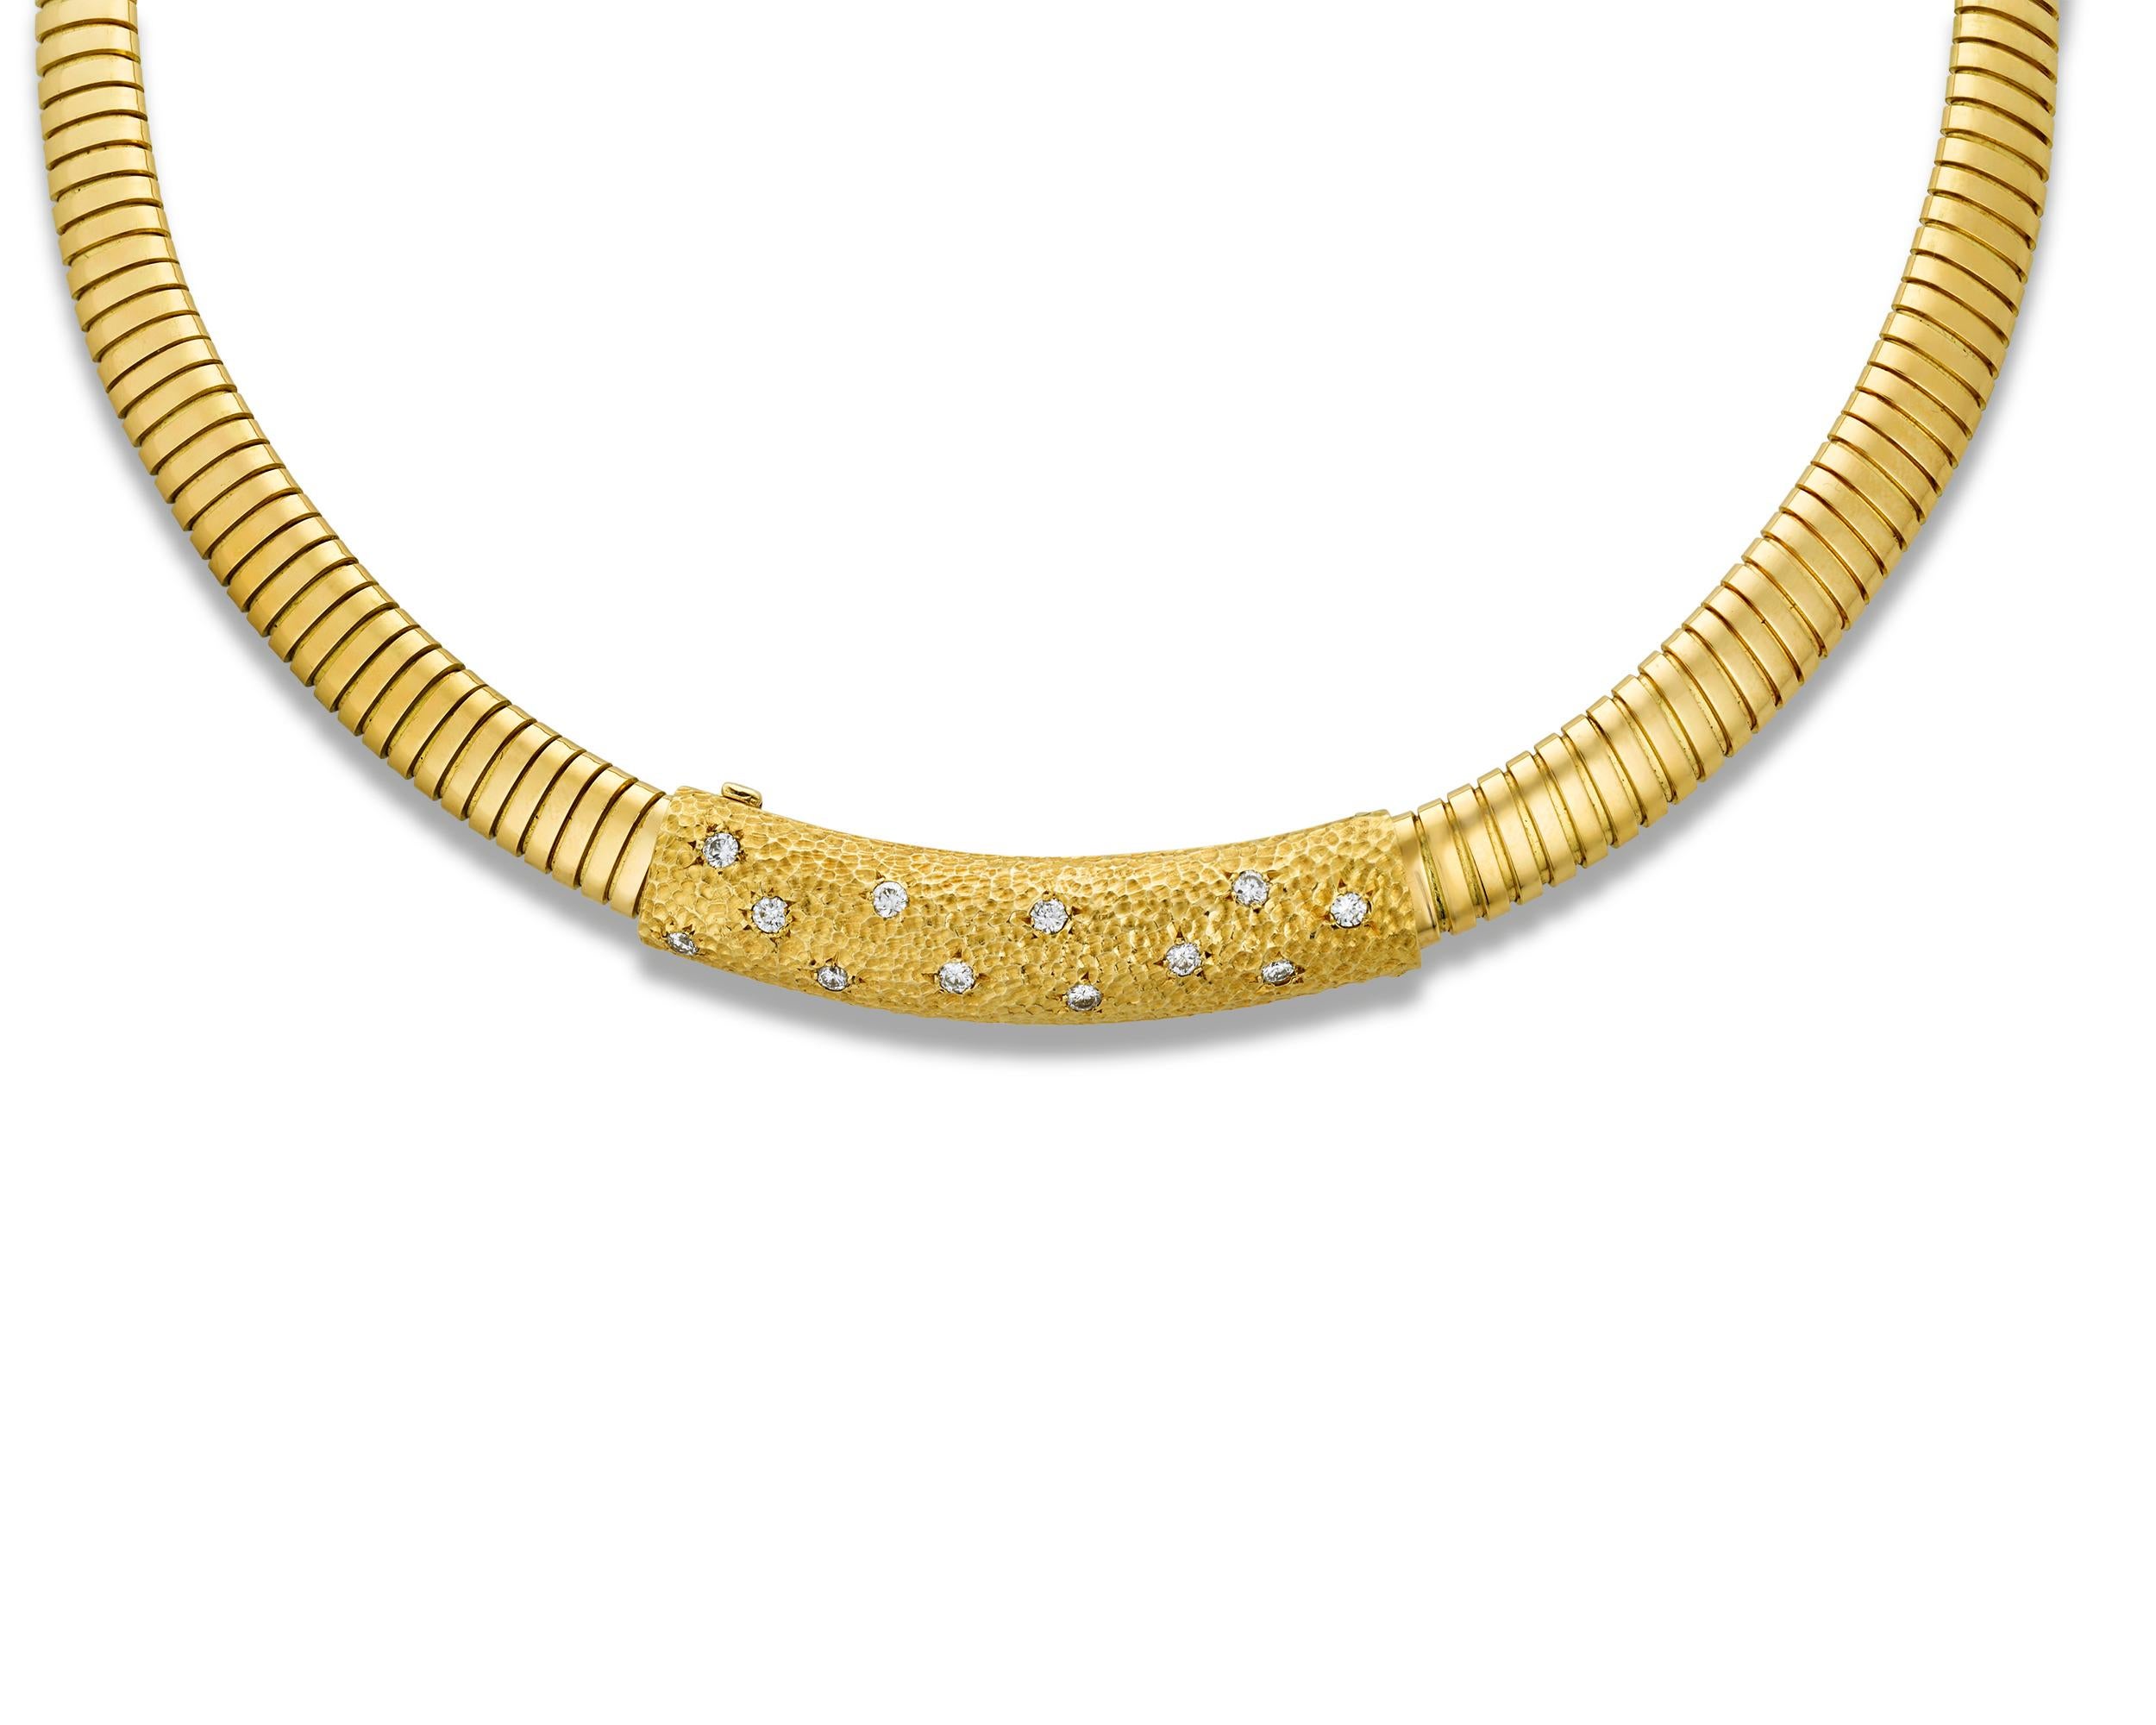 This exceptional Van Cleef & Arpels necklace is a wonder of retro design. This necklace is comprised of a revolutionary, flexible Tubogas link chain of 18K yellow gold. Slightly raised round white diamonds accent the center textured gold panel,